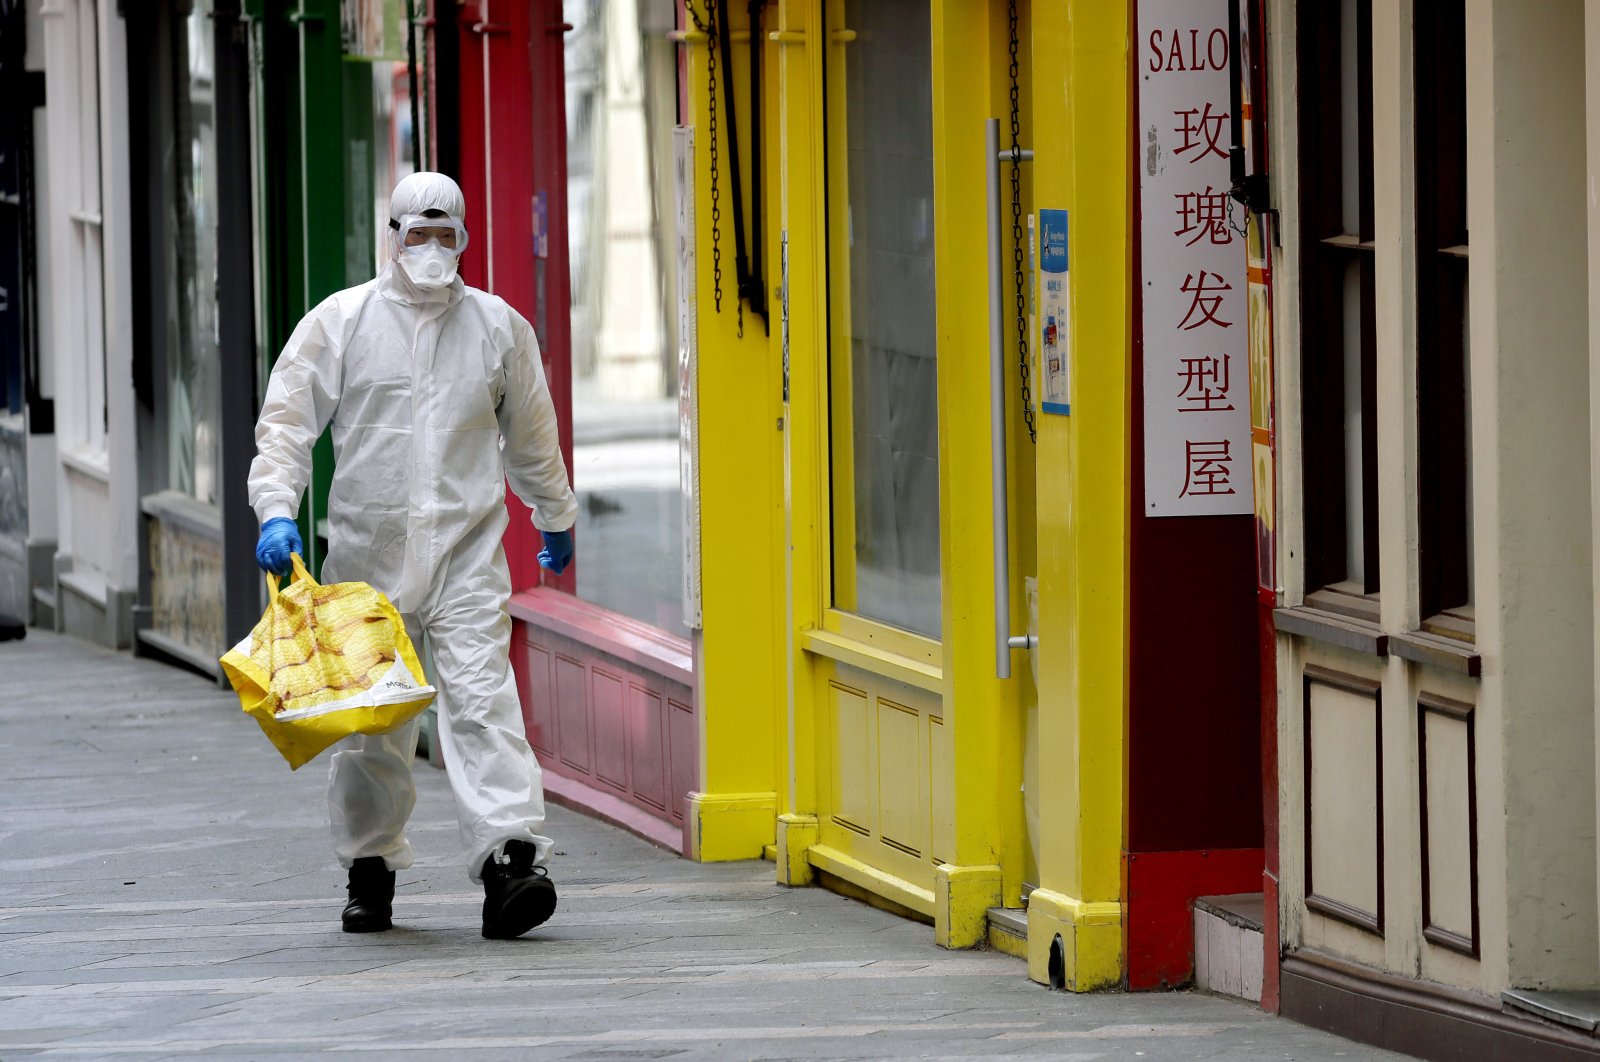 A man wears full protective equipment to protect against the coronavirus as he shops in London, Monday, May 4, 2020, as the UK enters a seventh week of lockdown to help stop the spread of coronavirus. (AP Photo)